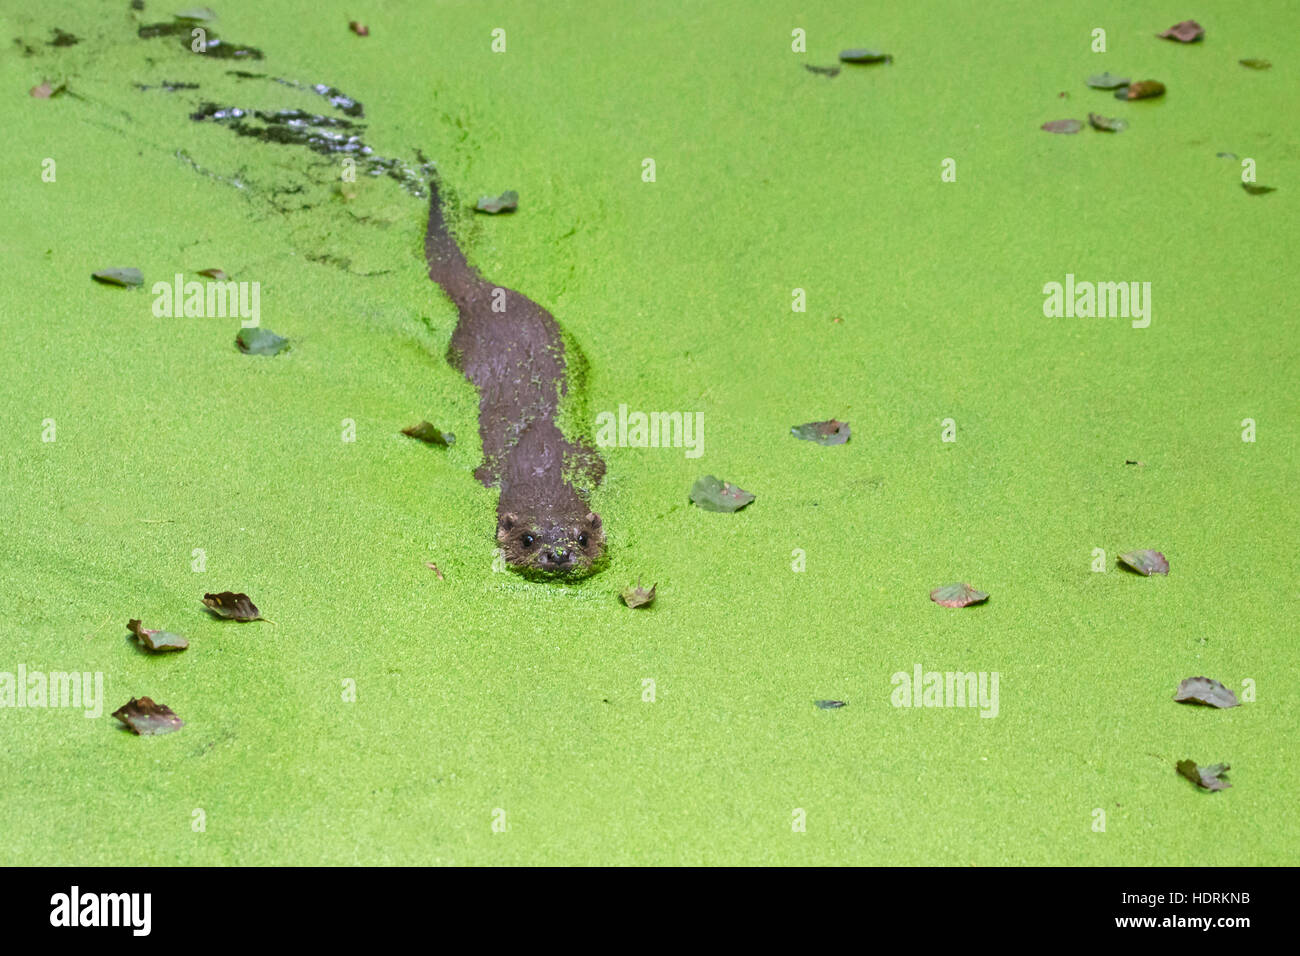 European River Otter (Lutra lutra) swimming in pond covered in duckweed Stock Photo